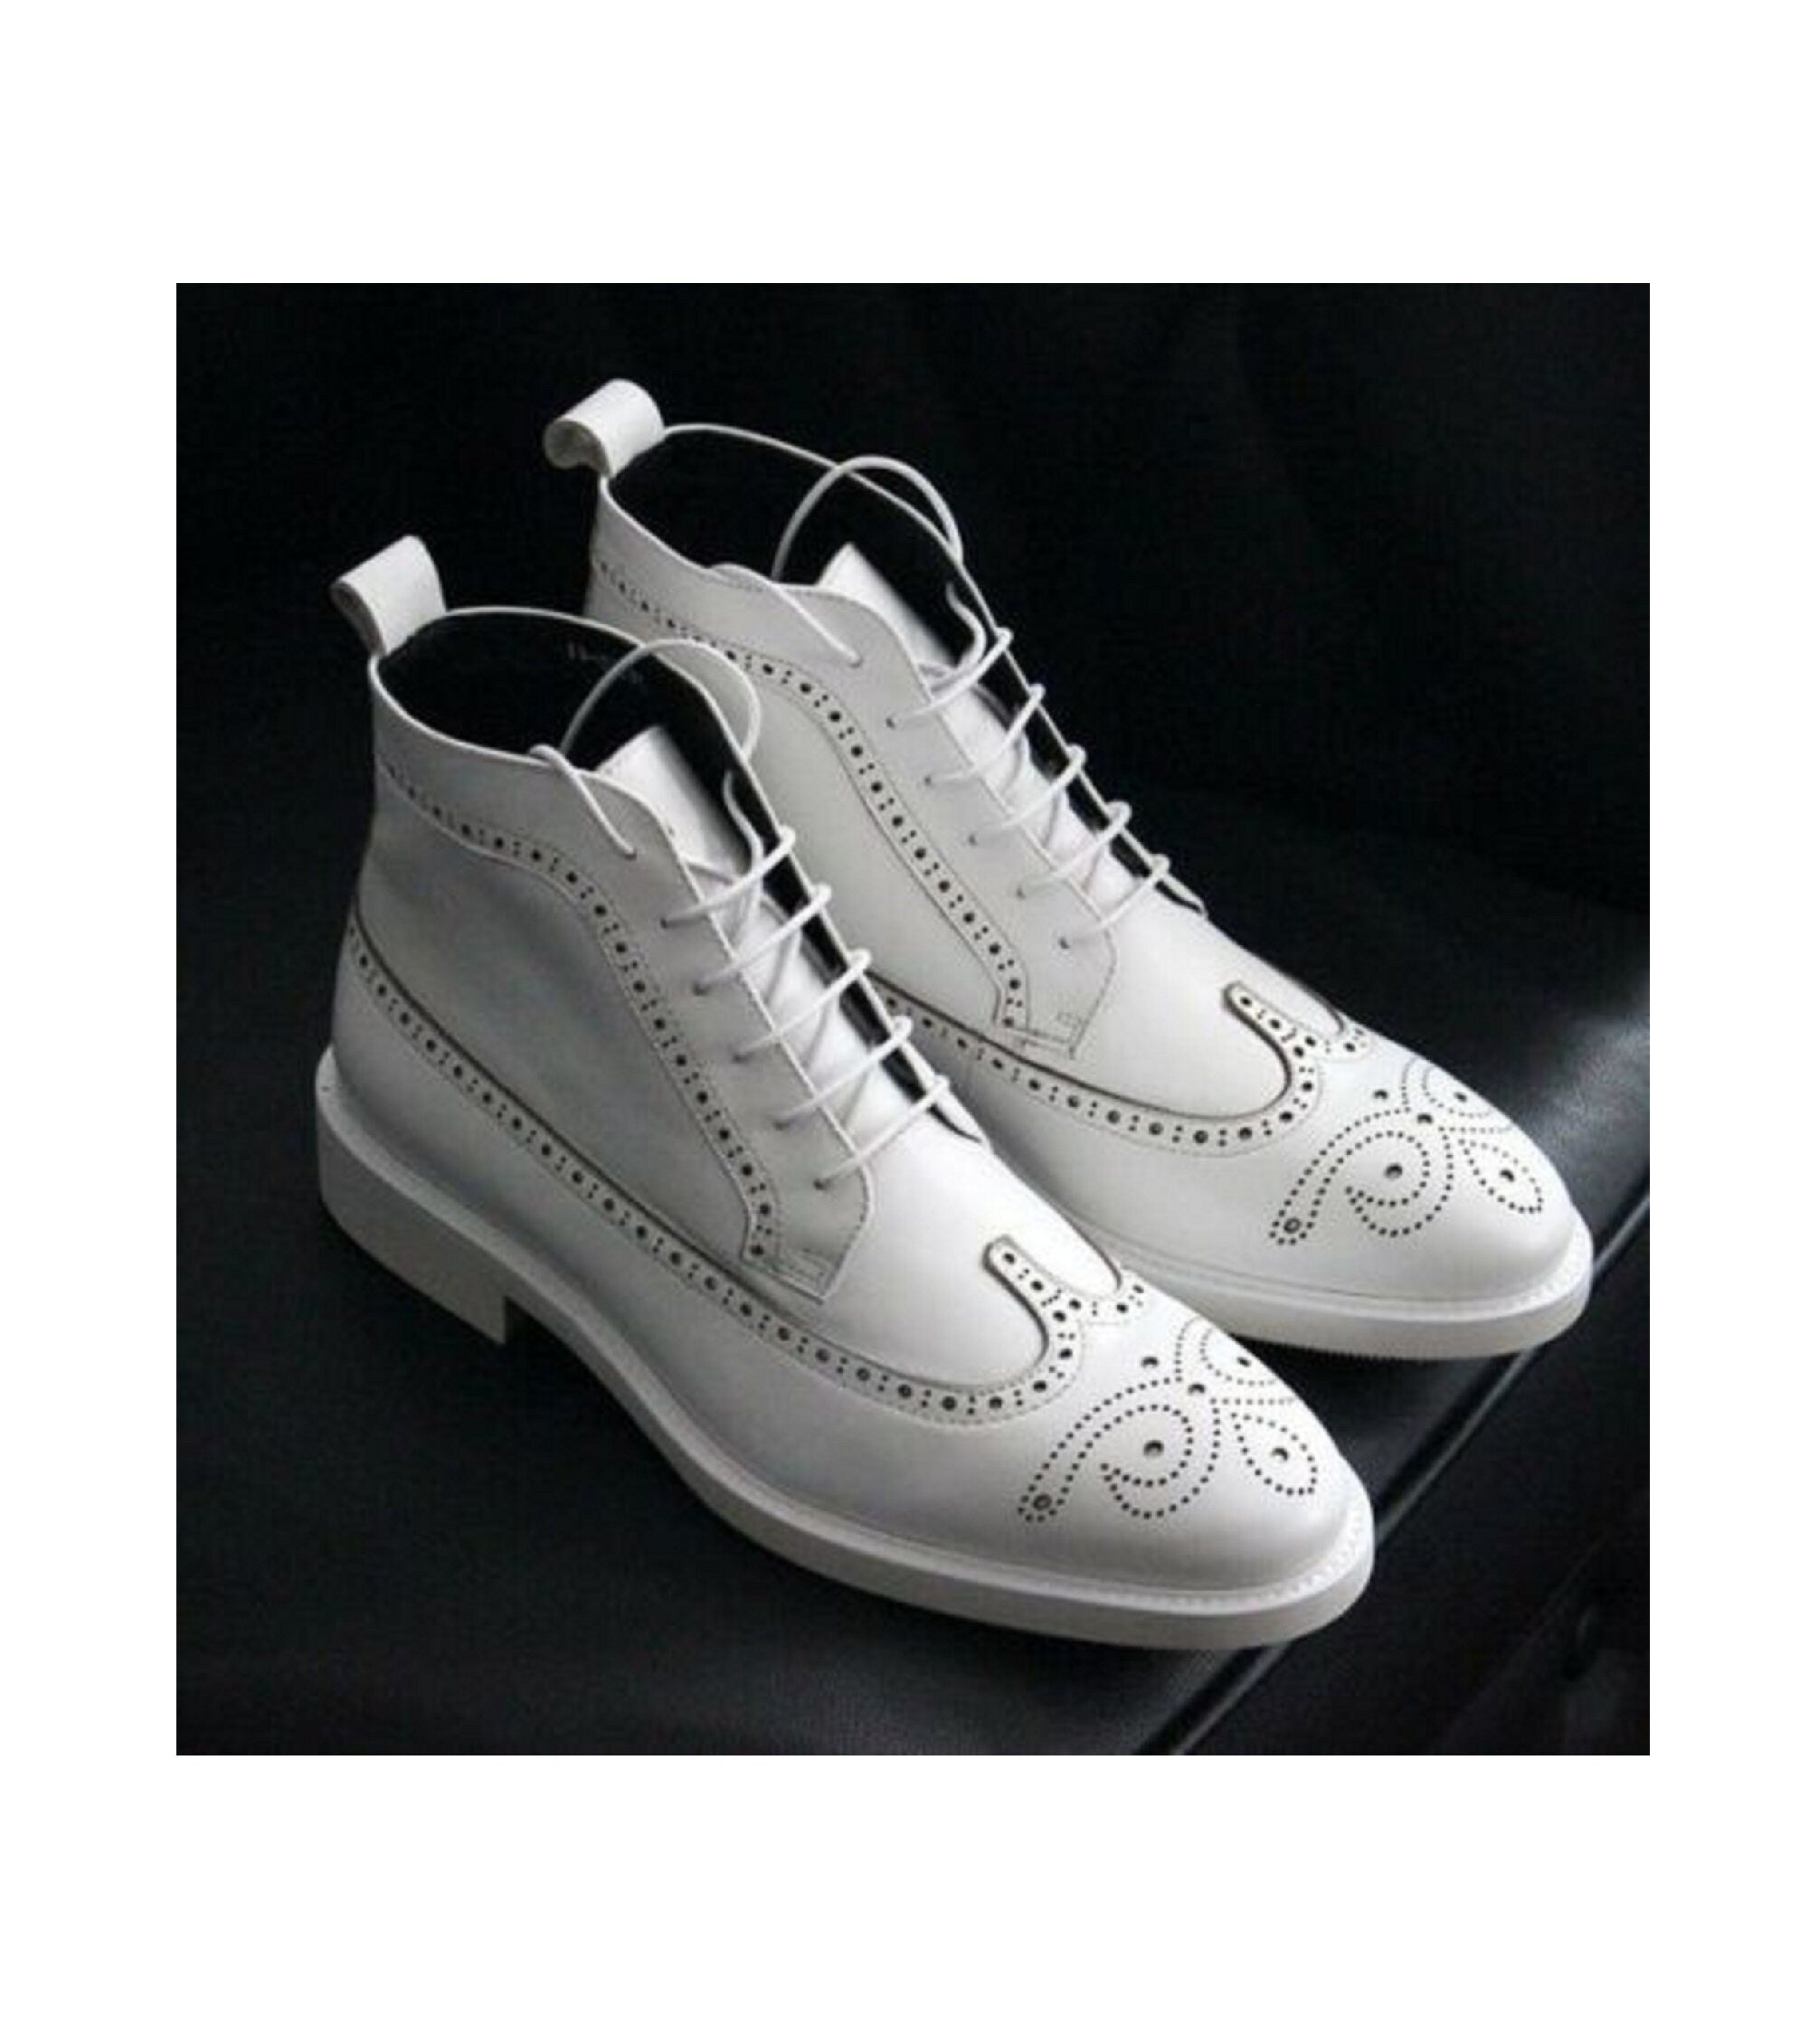 New Men's Handmade White Color Ankle High Pure White Leather Lace Up Wing Tip Brogue Boots